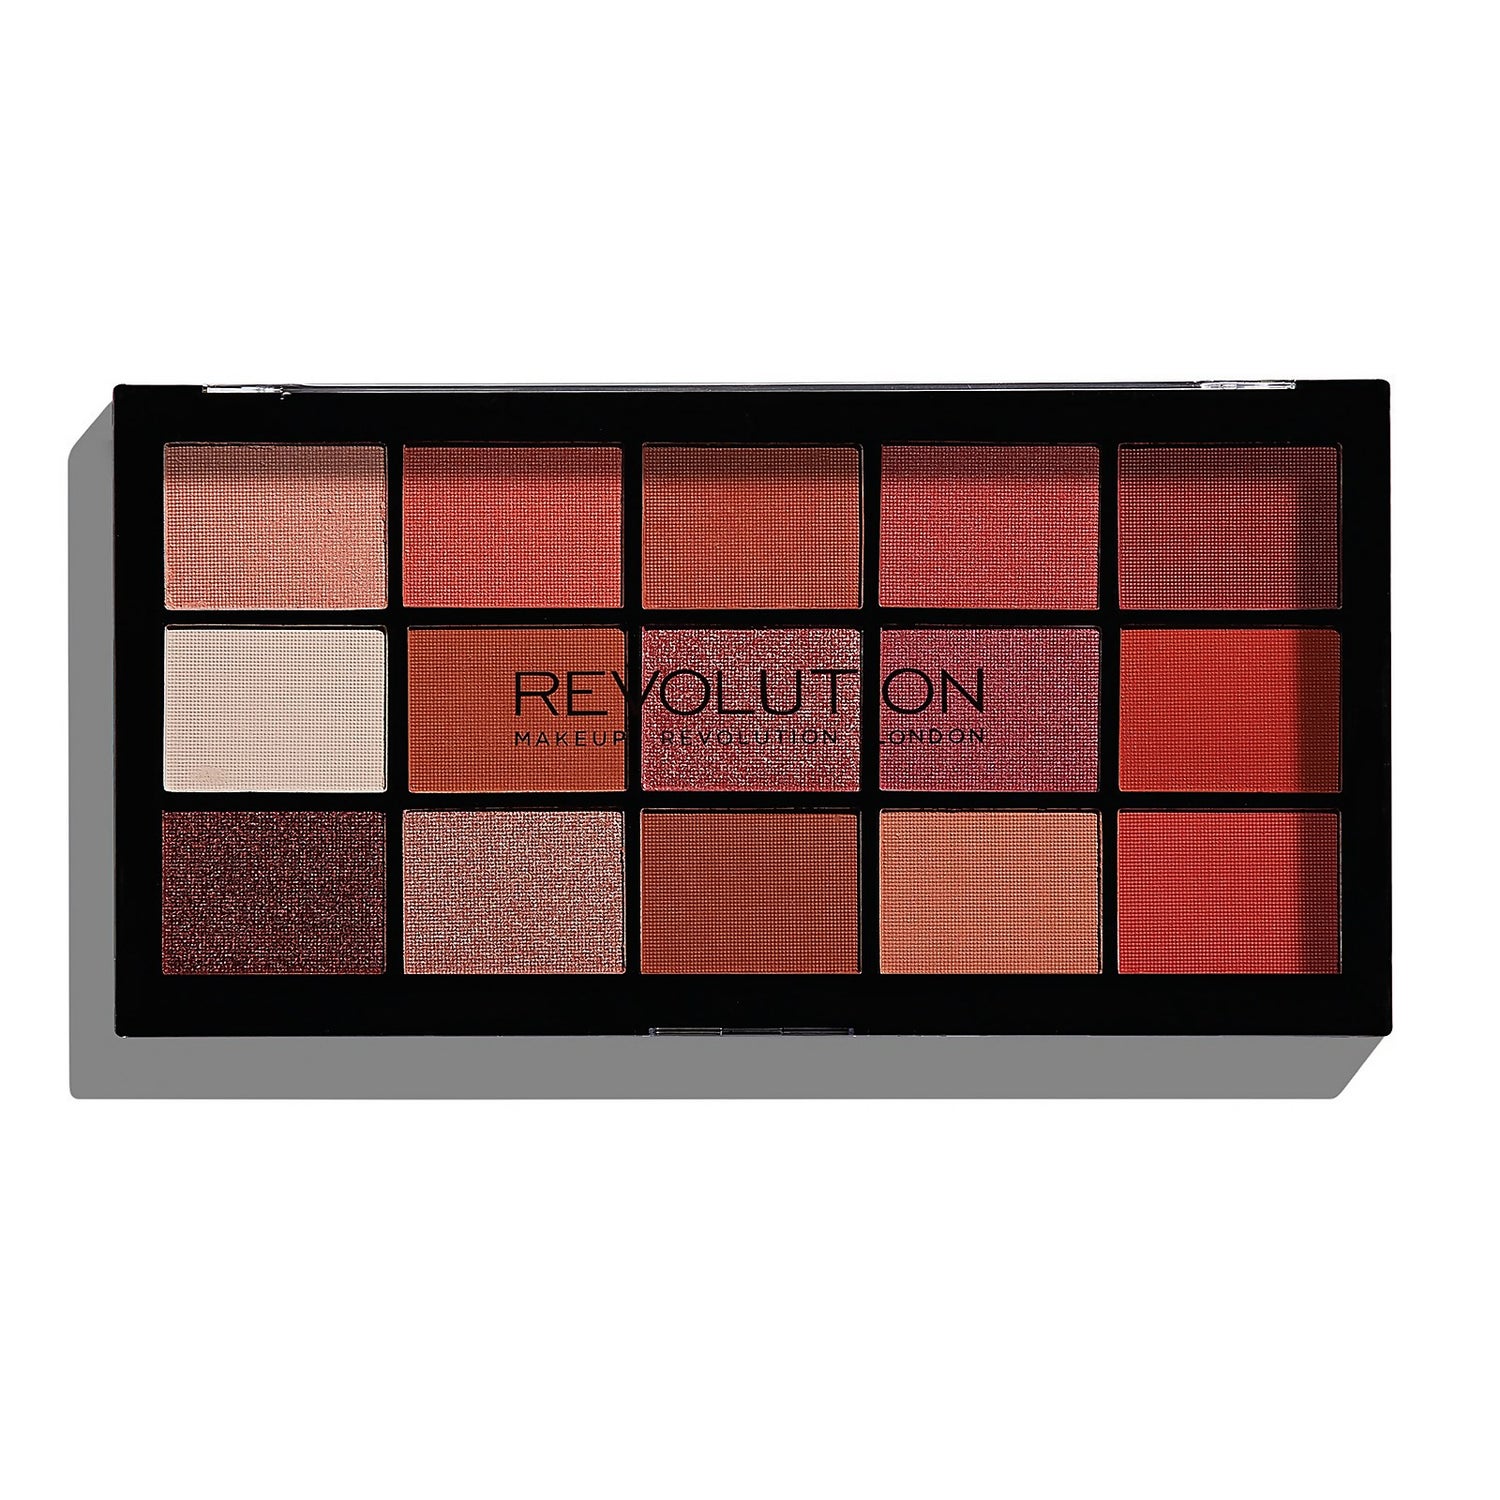 Reloaded Newtrals 2 | Revolution Beauty Official Site